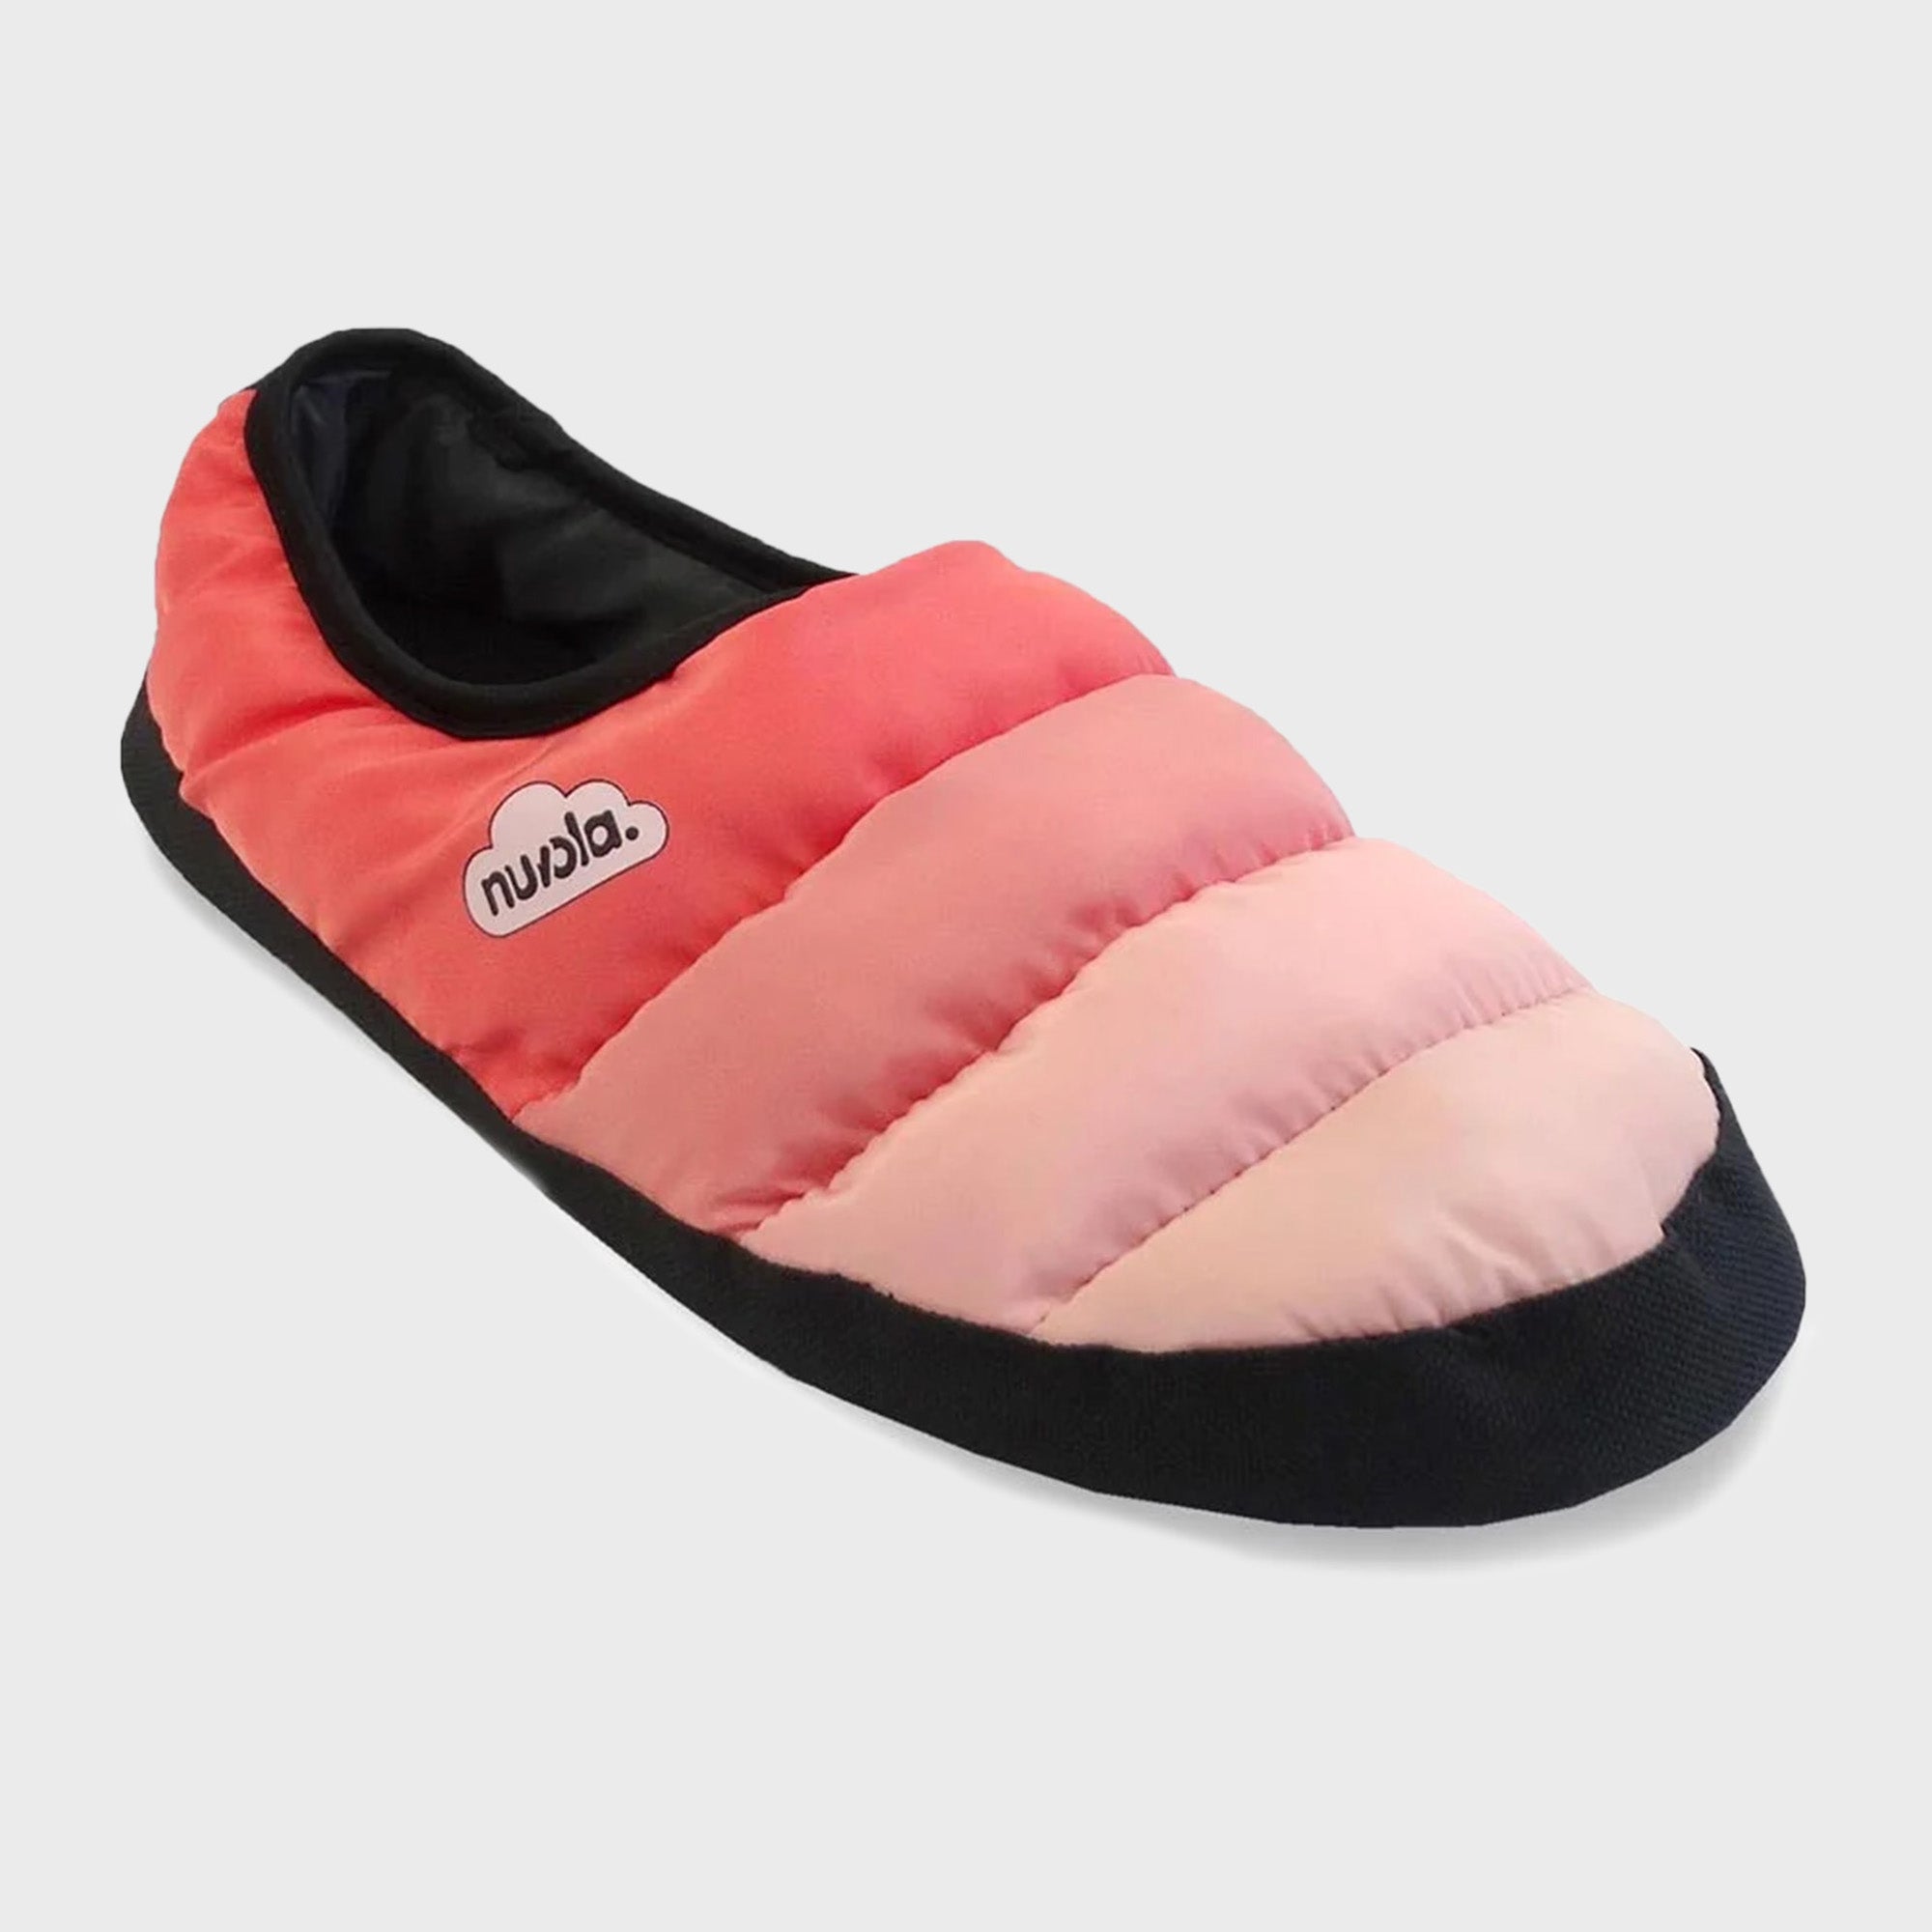 Nuvola Classic Colors Slippers in Coral CNCLACLRS667 FROM EIGHTYWINGOLD - OFFICIAL BRAND PARTNER